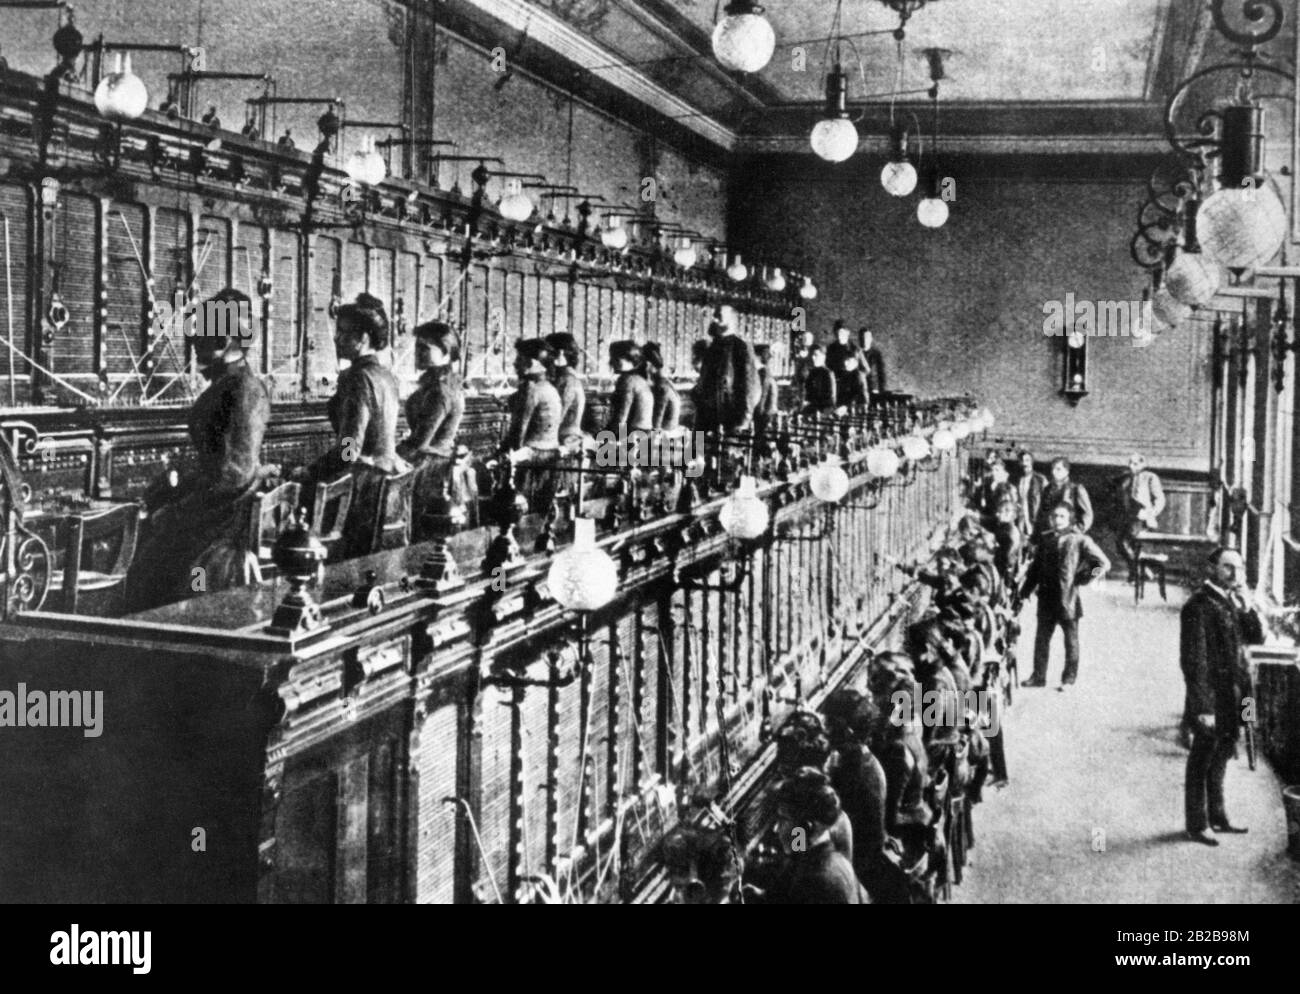 The first public telephone exchange in the German Reich was opened in Berlin in 1881. The photo shows the Telephone Office I., in which almost exclusively women are employed and male postal workers are the supervisors. Stock Photo